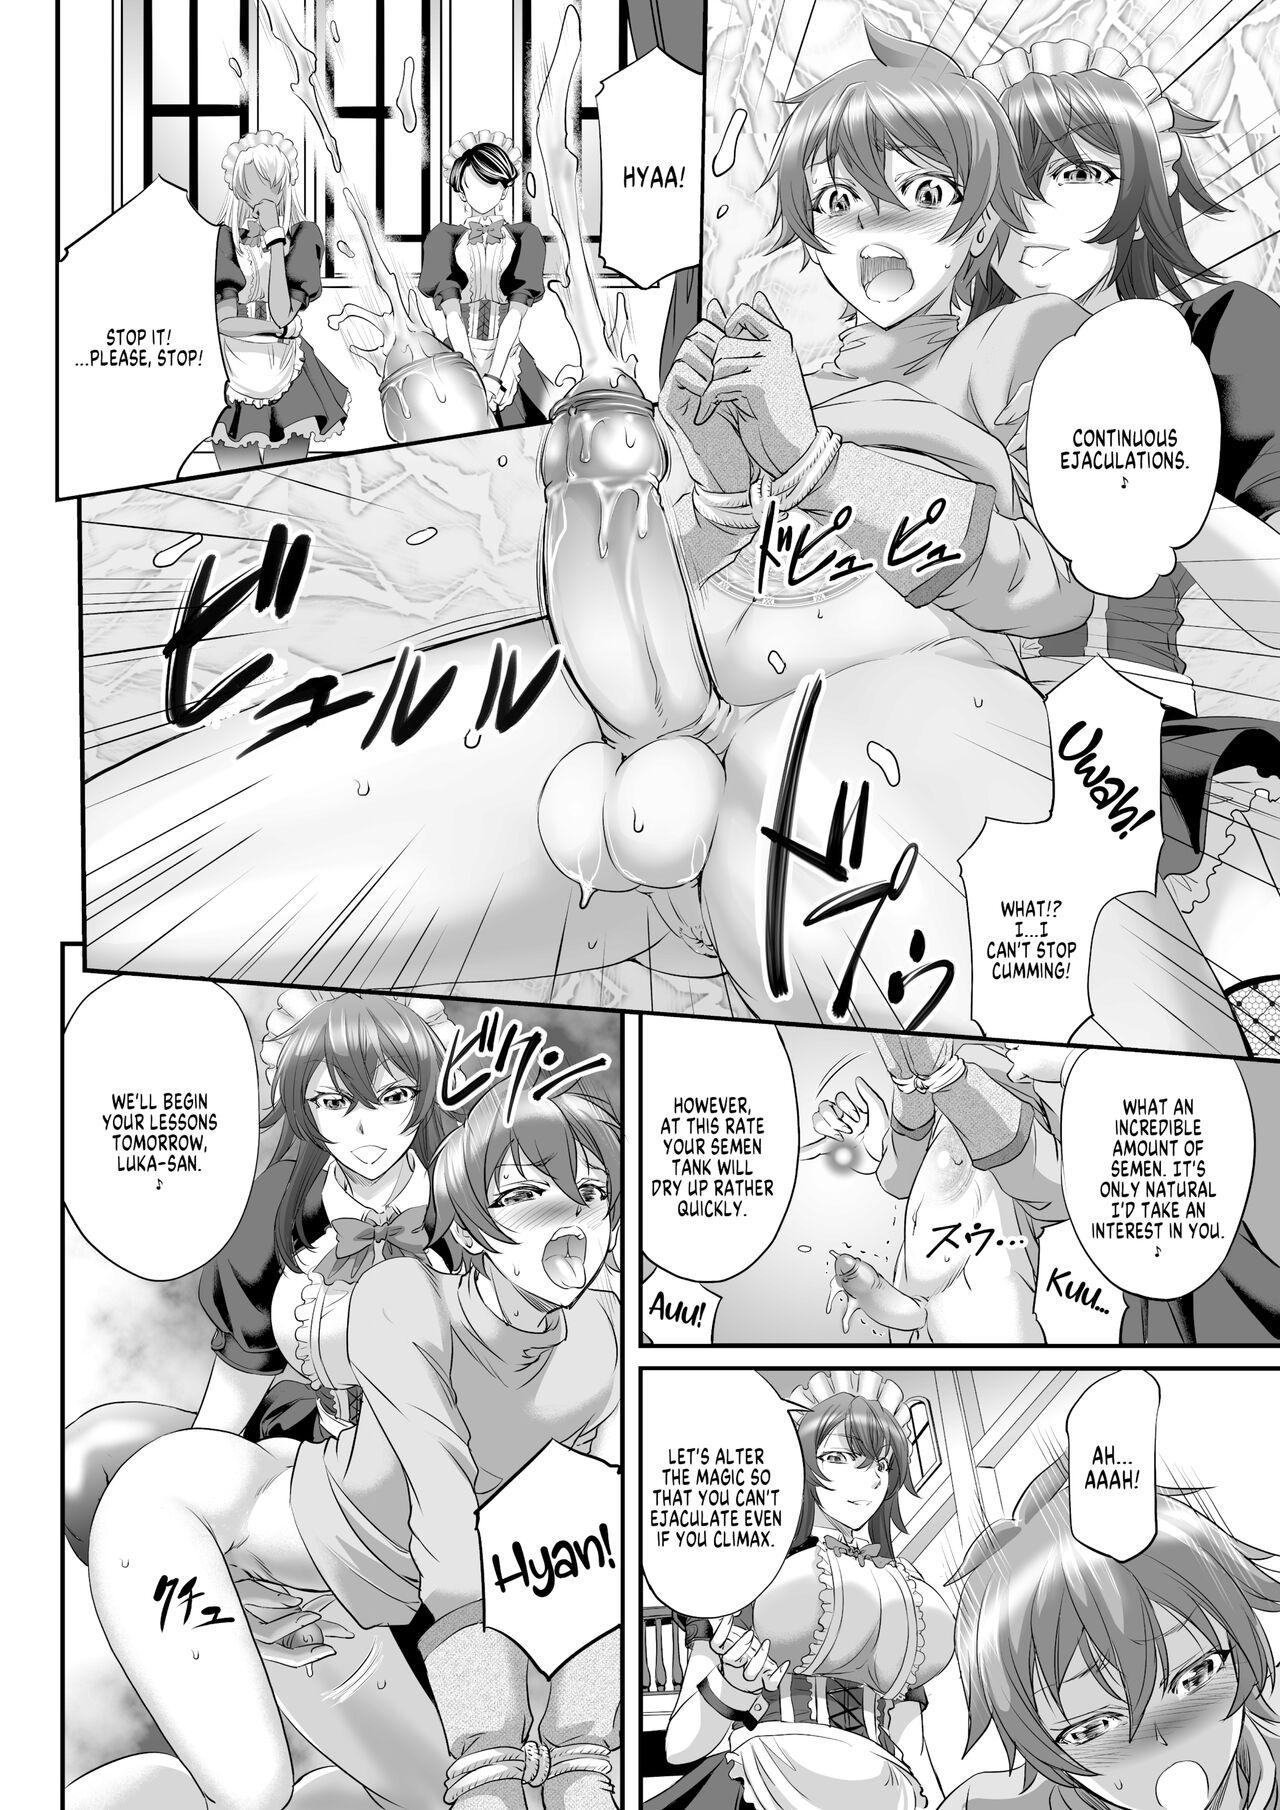 Amateur Asian MonMusu Quest! ~ Luka no Maid Shugyou | Monster Girl Quest! Luka’s Maid Training - Monster girl quest White - Page 6